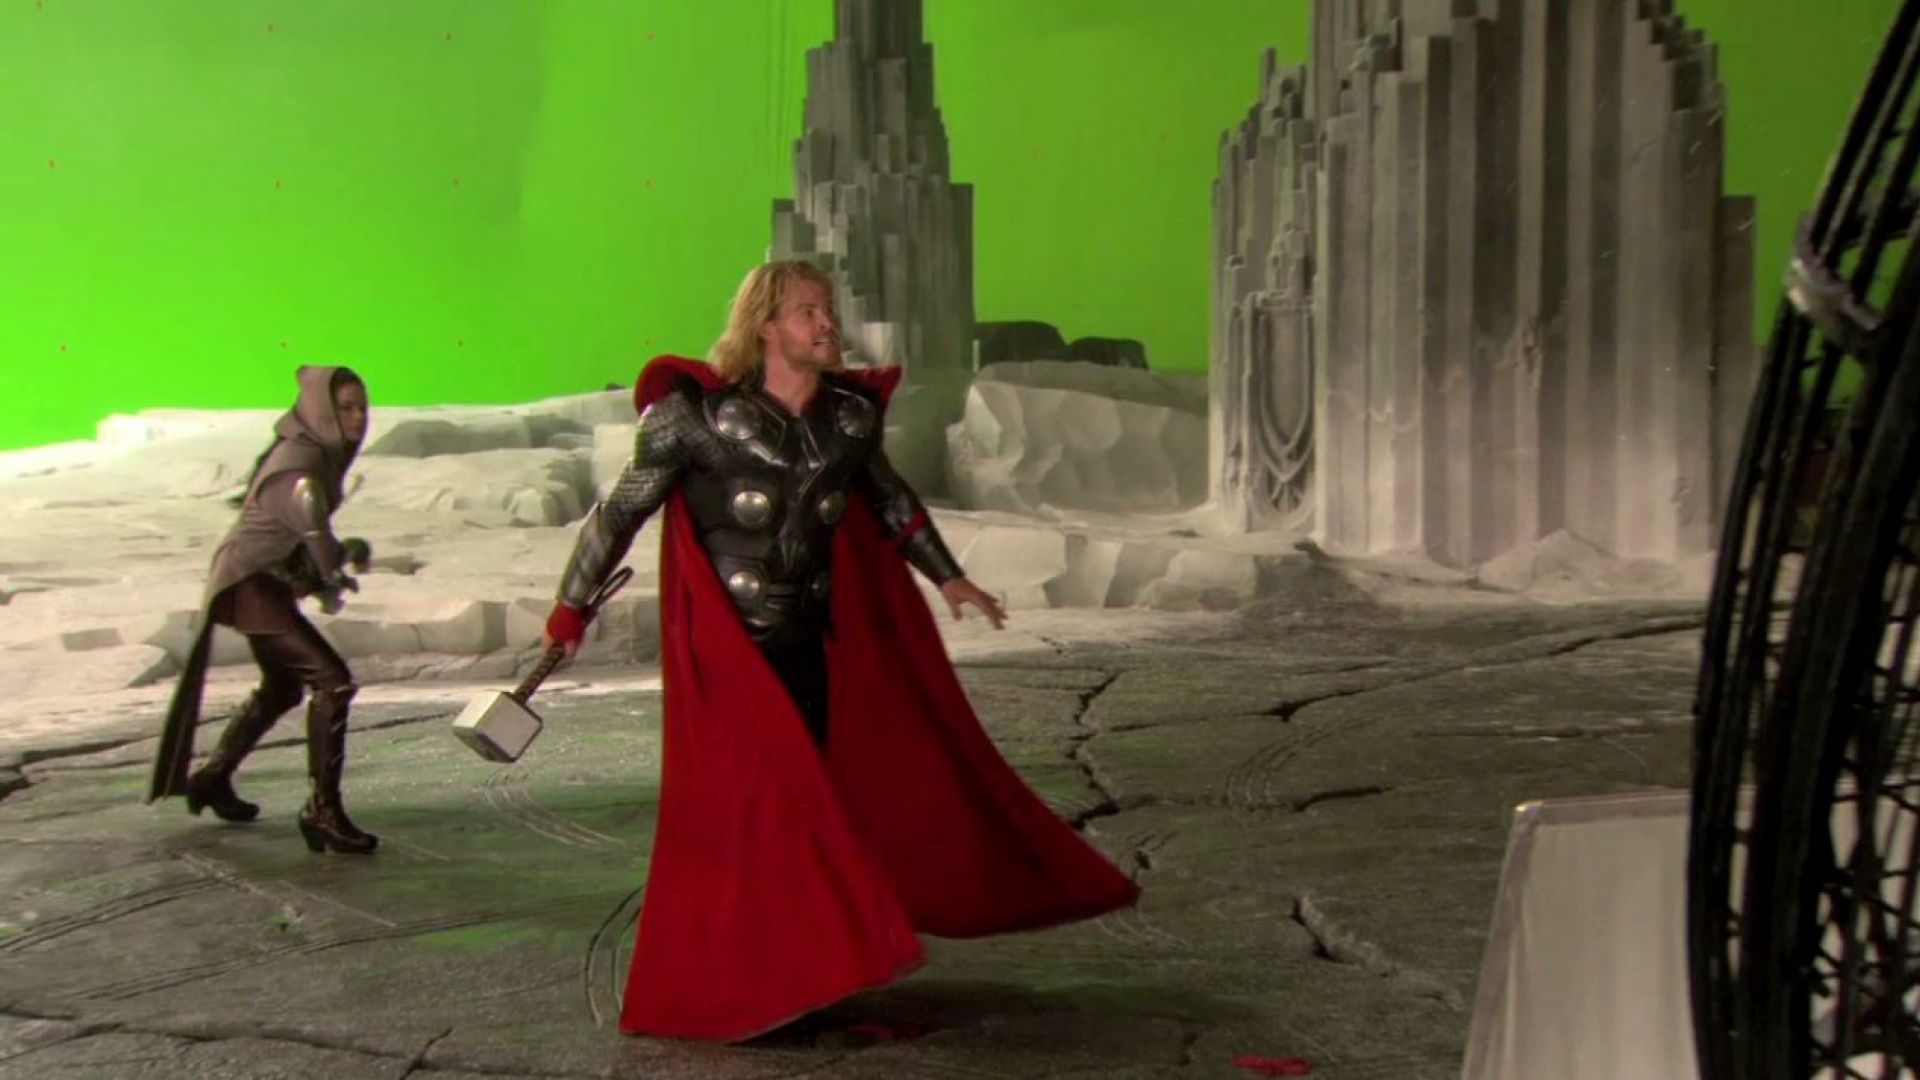 Kenneth Branagh, Natalie Portman and Anthony Hopkins talk about working with Chris Hemsworth on Thor